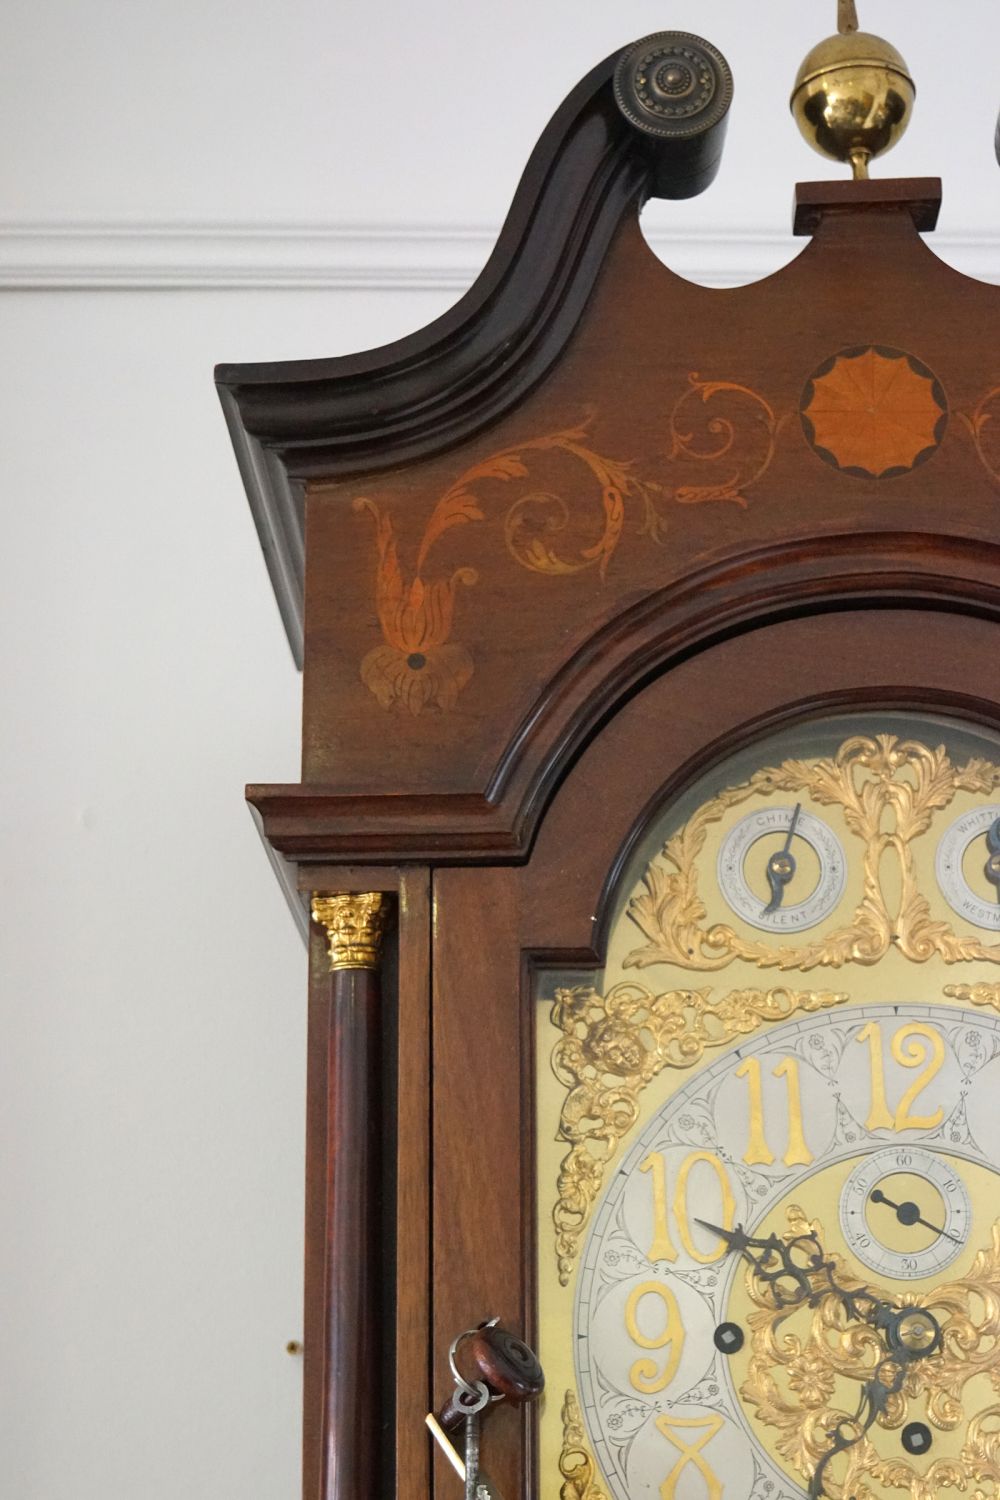 EDWARDIAN MARQUETRY LONG CASE CLOCK - Image 5 of 5